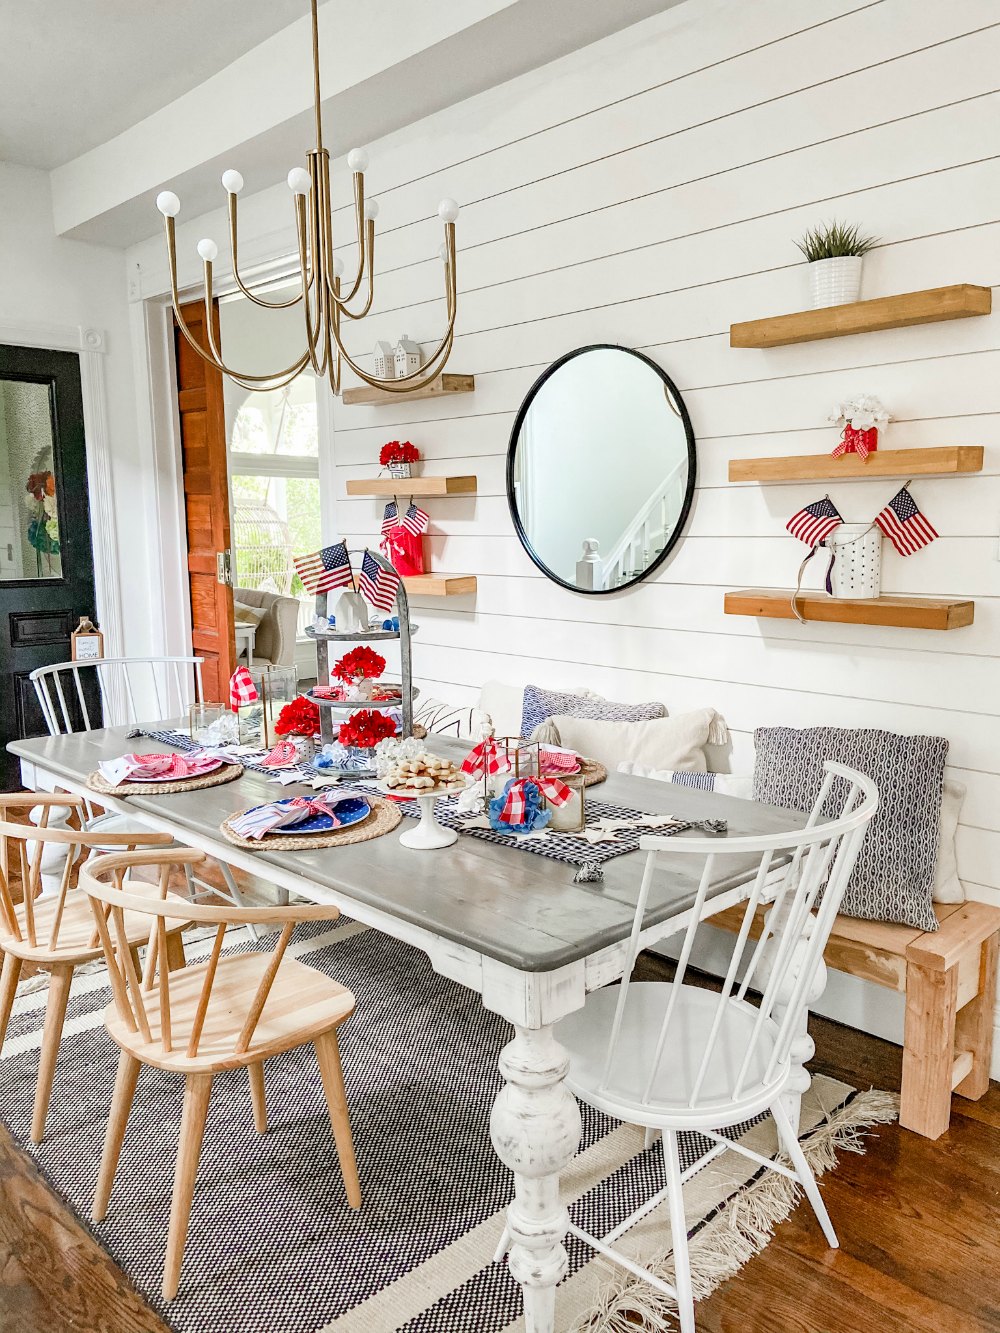 ive Ways to Create an Easy Fourth of July Table. Create a festive red white and blue table using dollar items. 